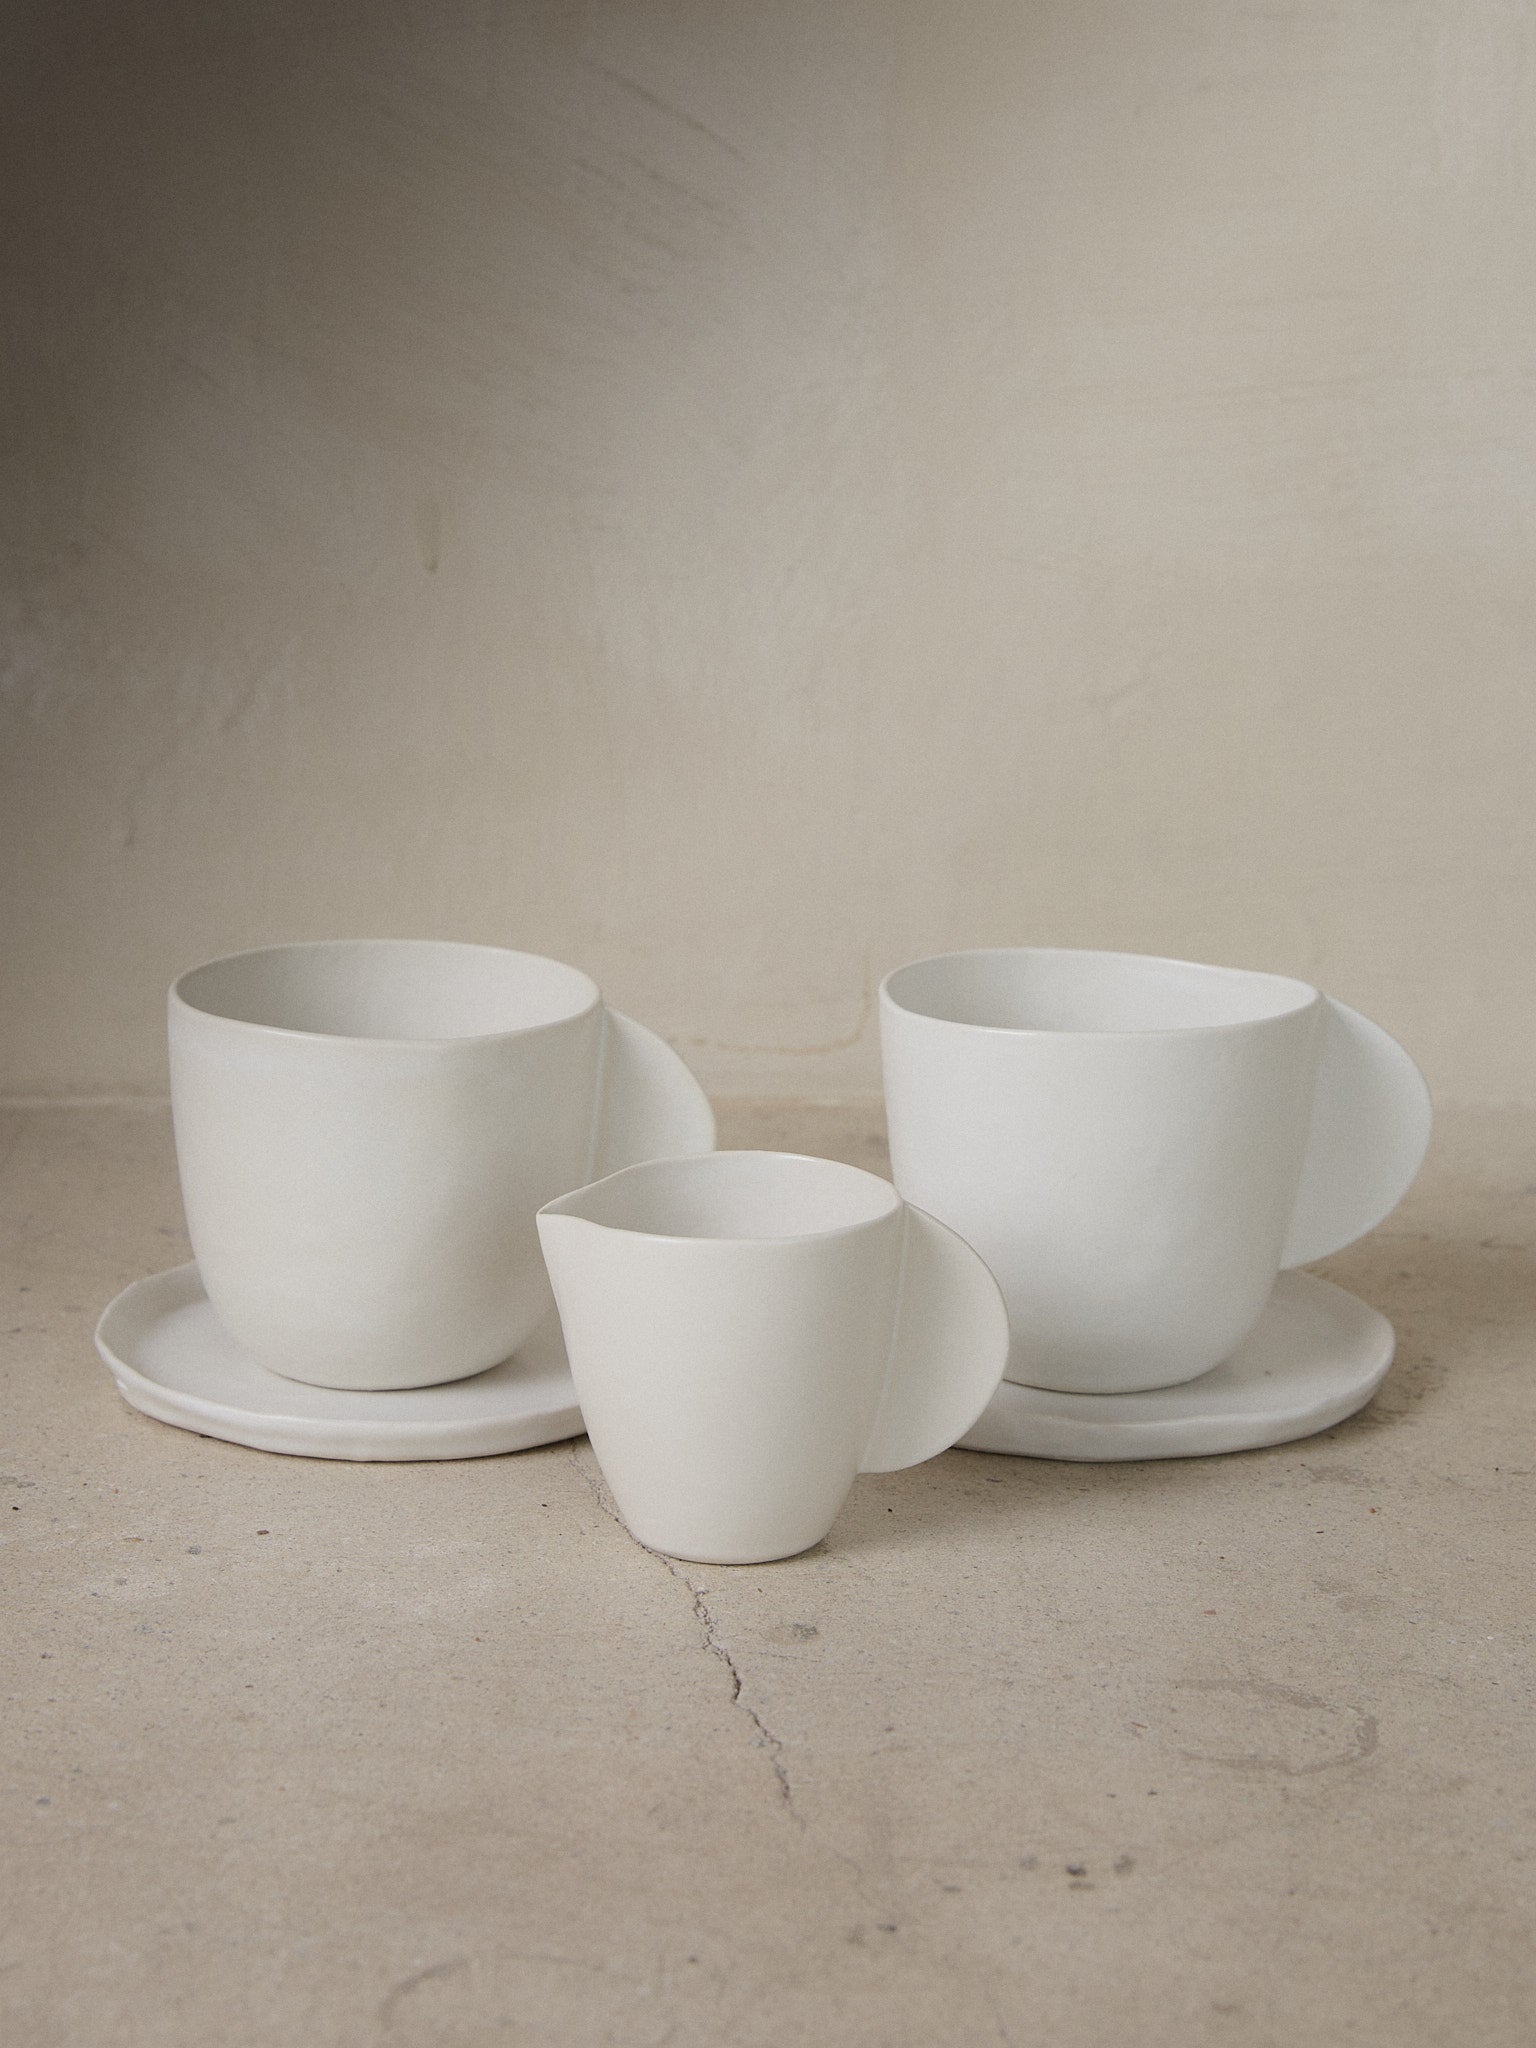 Raw Coffee + Creamer Set. Exclusively ours. Limited edition, minimalist coffee or tea set recalling the natural world with a perfectly imperfect shapes in versatile matte white stoneware. 